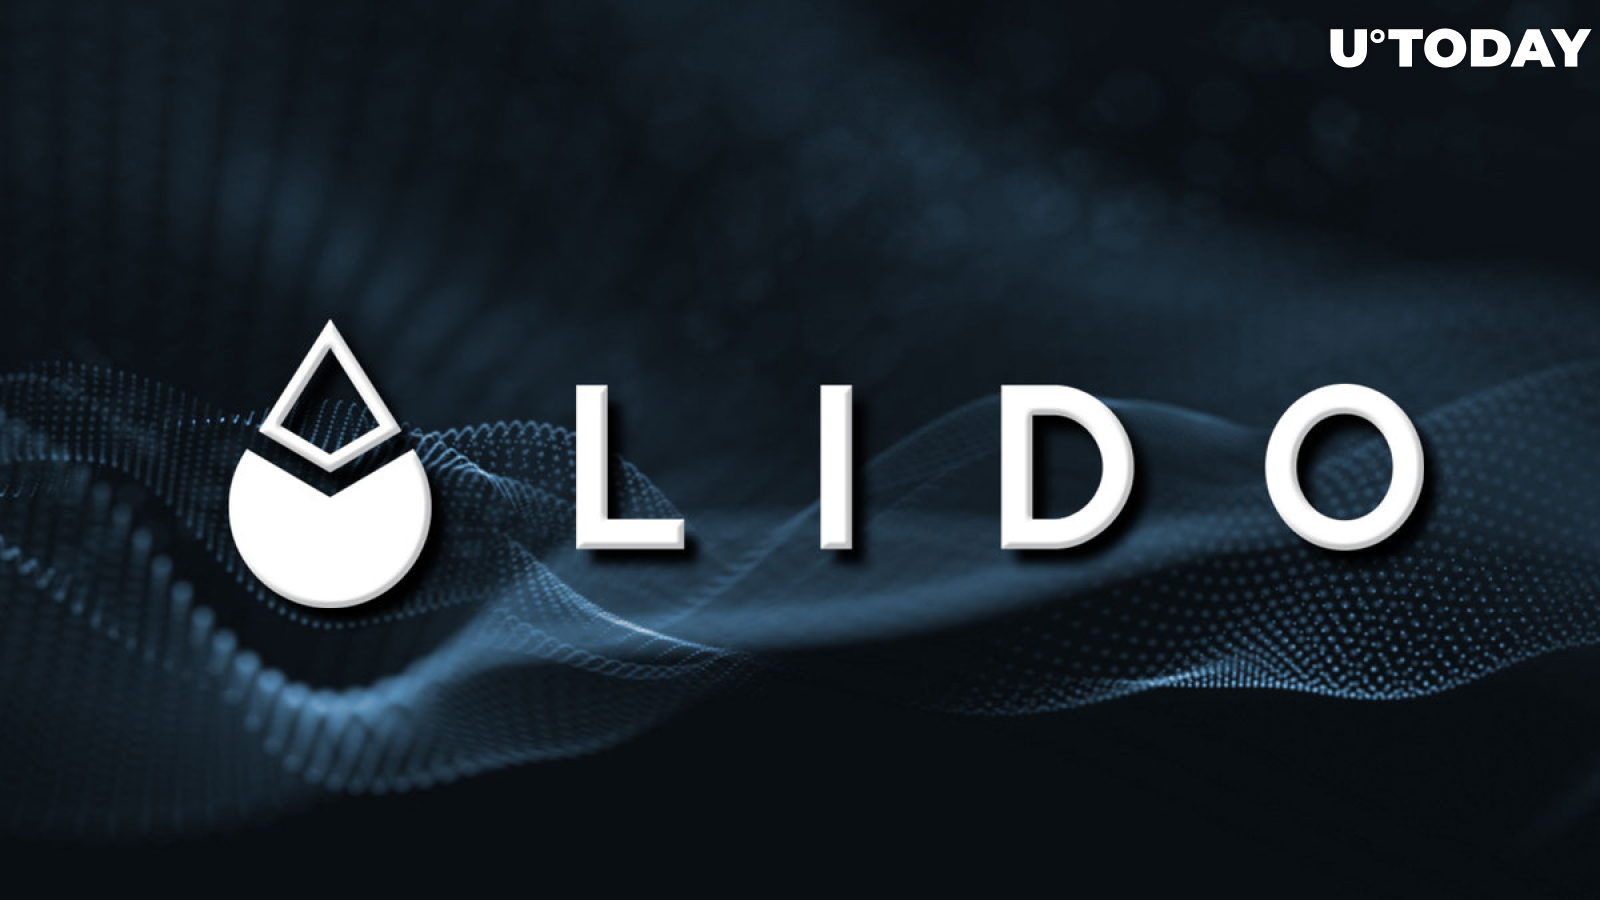 $5 Million of Lido Finance (LDO) Grabbed By Whales, Causing Spike to $1.3, Here's Why